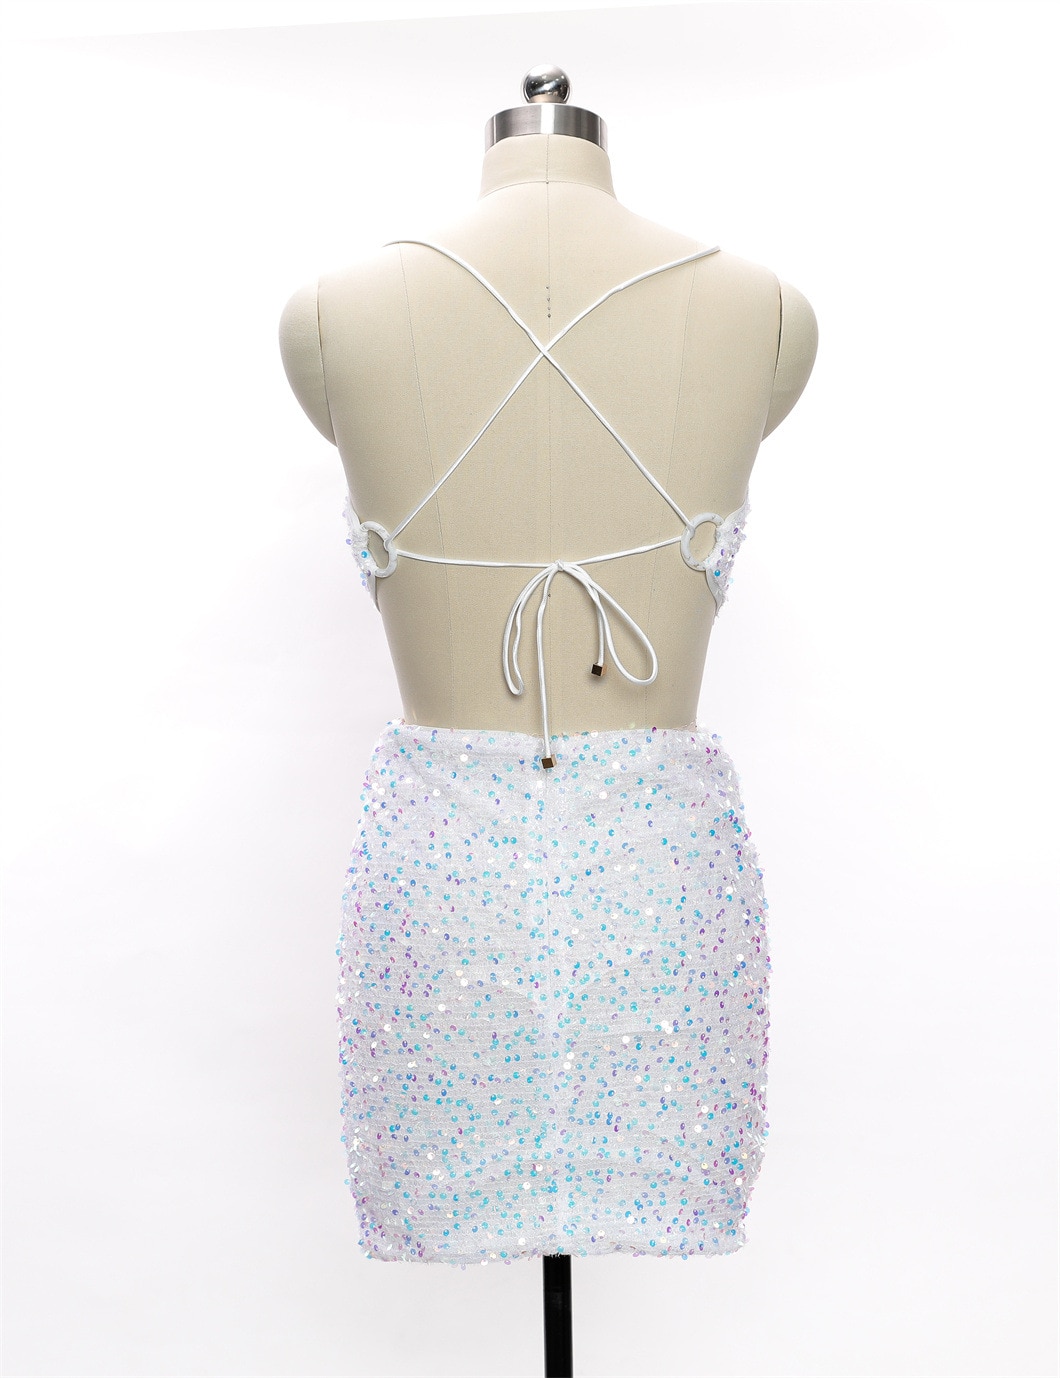 Backless-Spaghetti-Straps-Sequin-Summer-Mini-Dresses-for-Women-Evening-Party-Club-Outfits-5